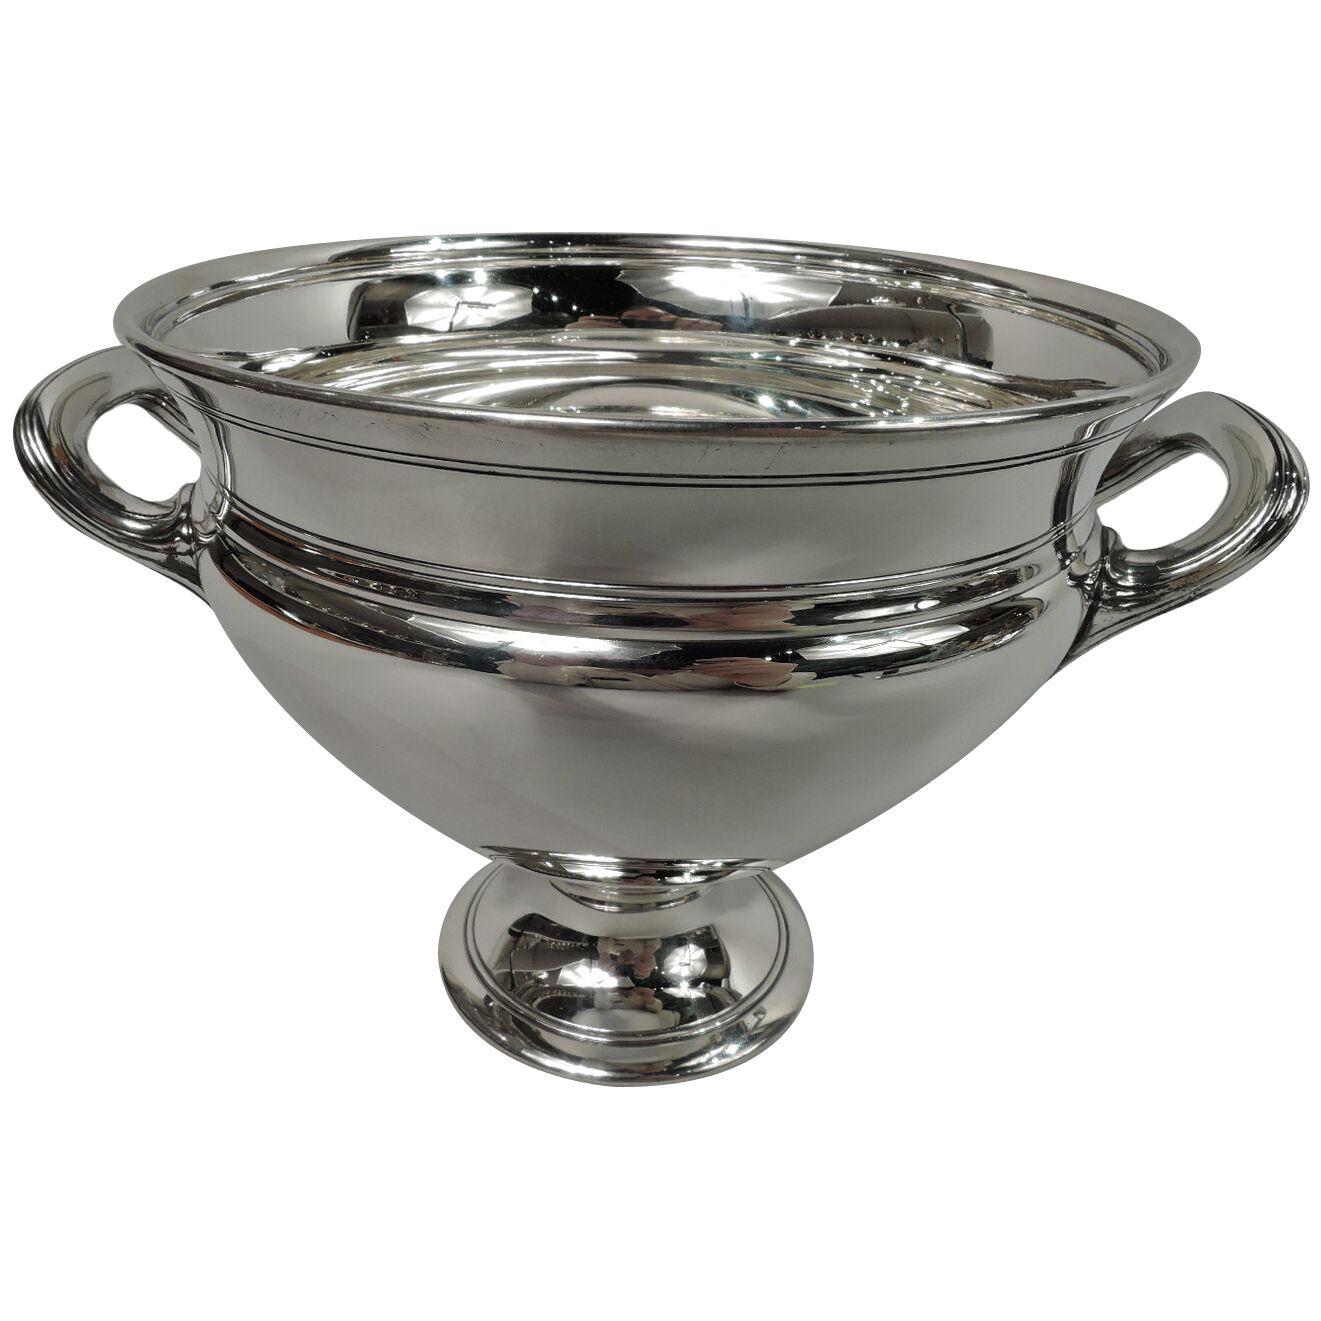 Tiffany Modern Classical Sterling Silver Bowl